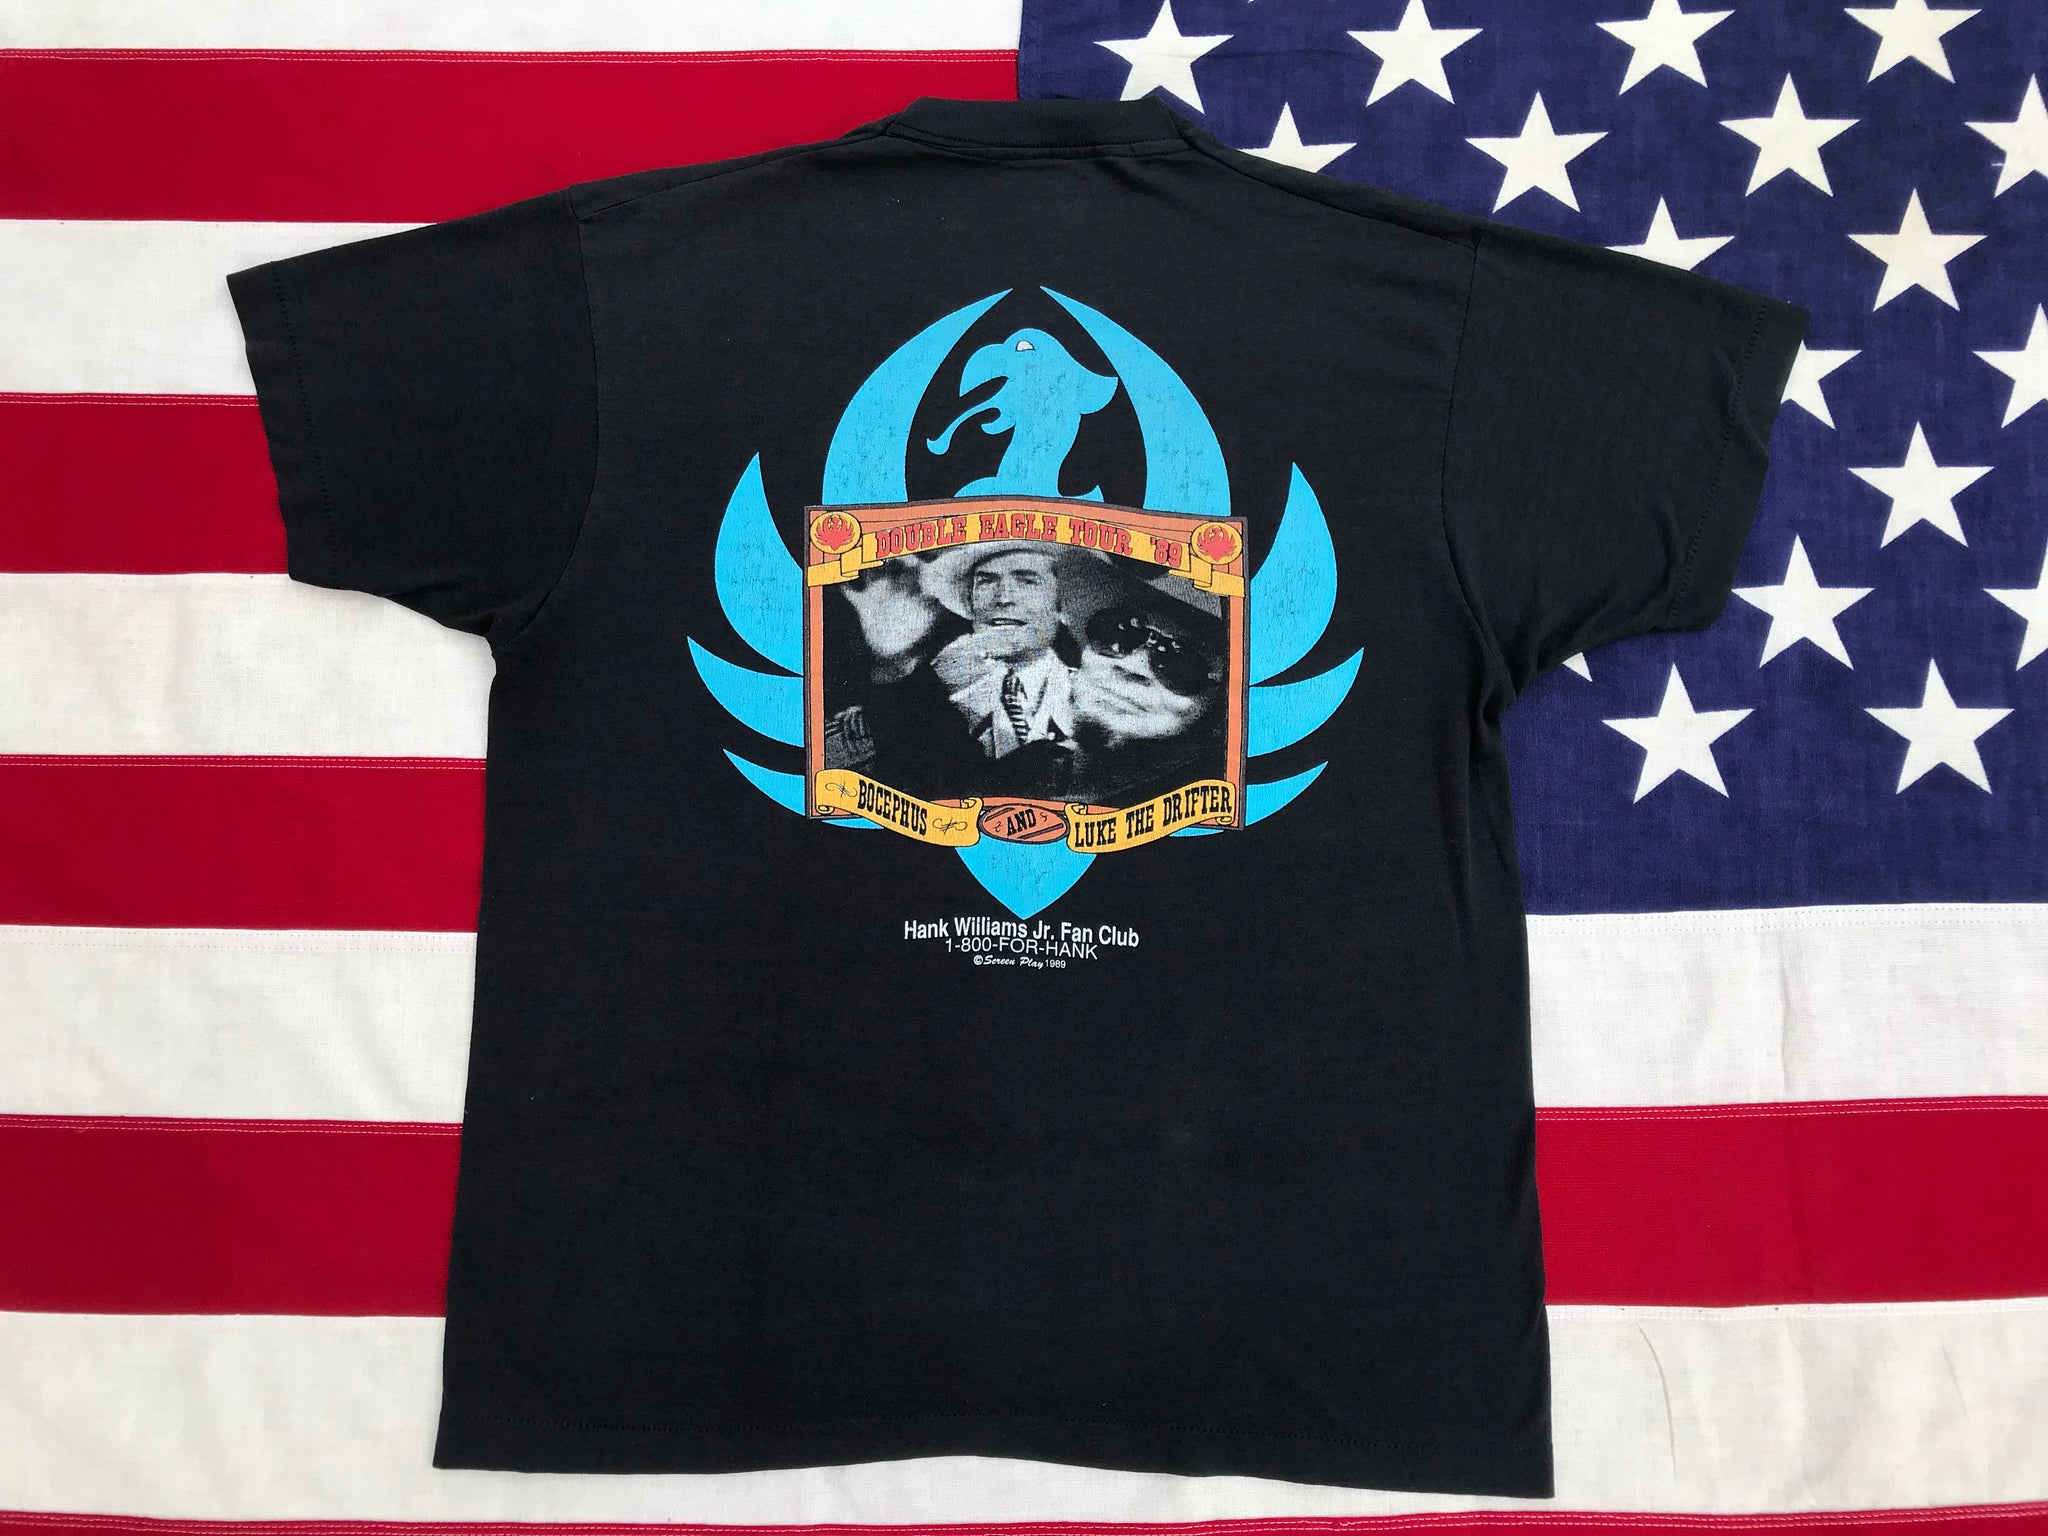 Hank Williams 1989 “ Double Eagle Tour ‘89 “ - “ There’s A Tear In My Beer “ Original Vintage Rock T-Shirt